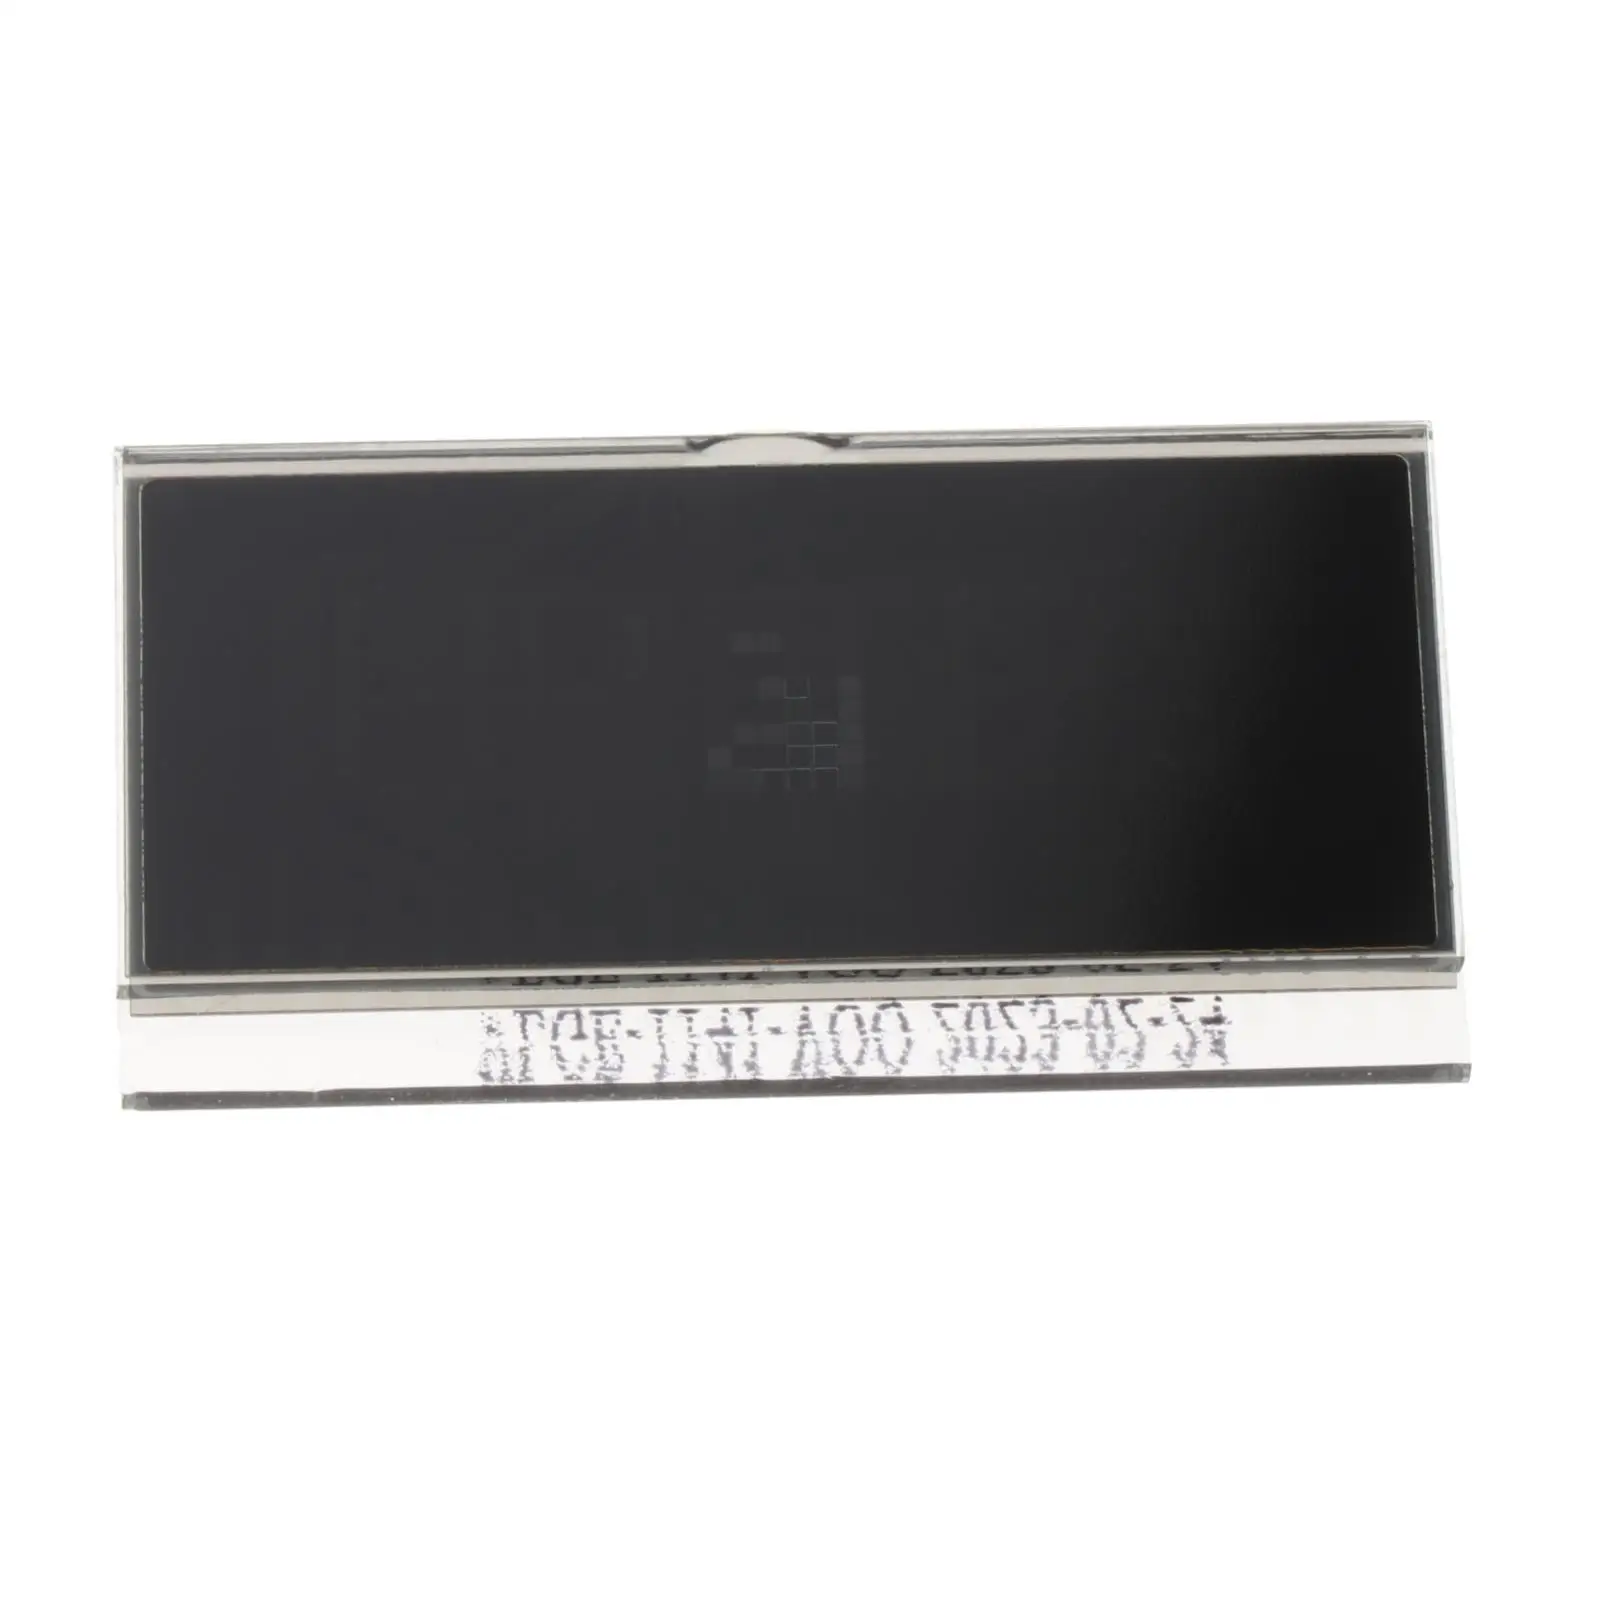 LCD Display Screen Professional Replacement Parts Durable for Audi A6 4F Q7 4L